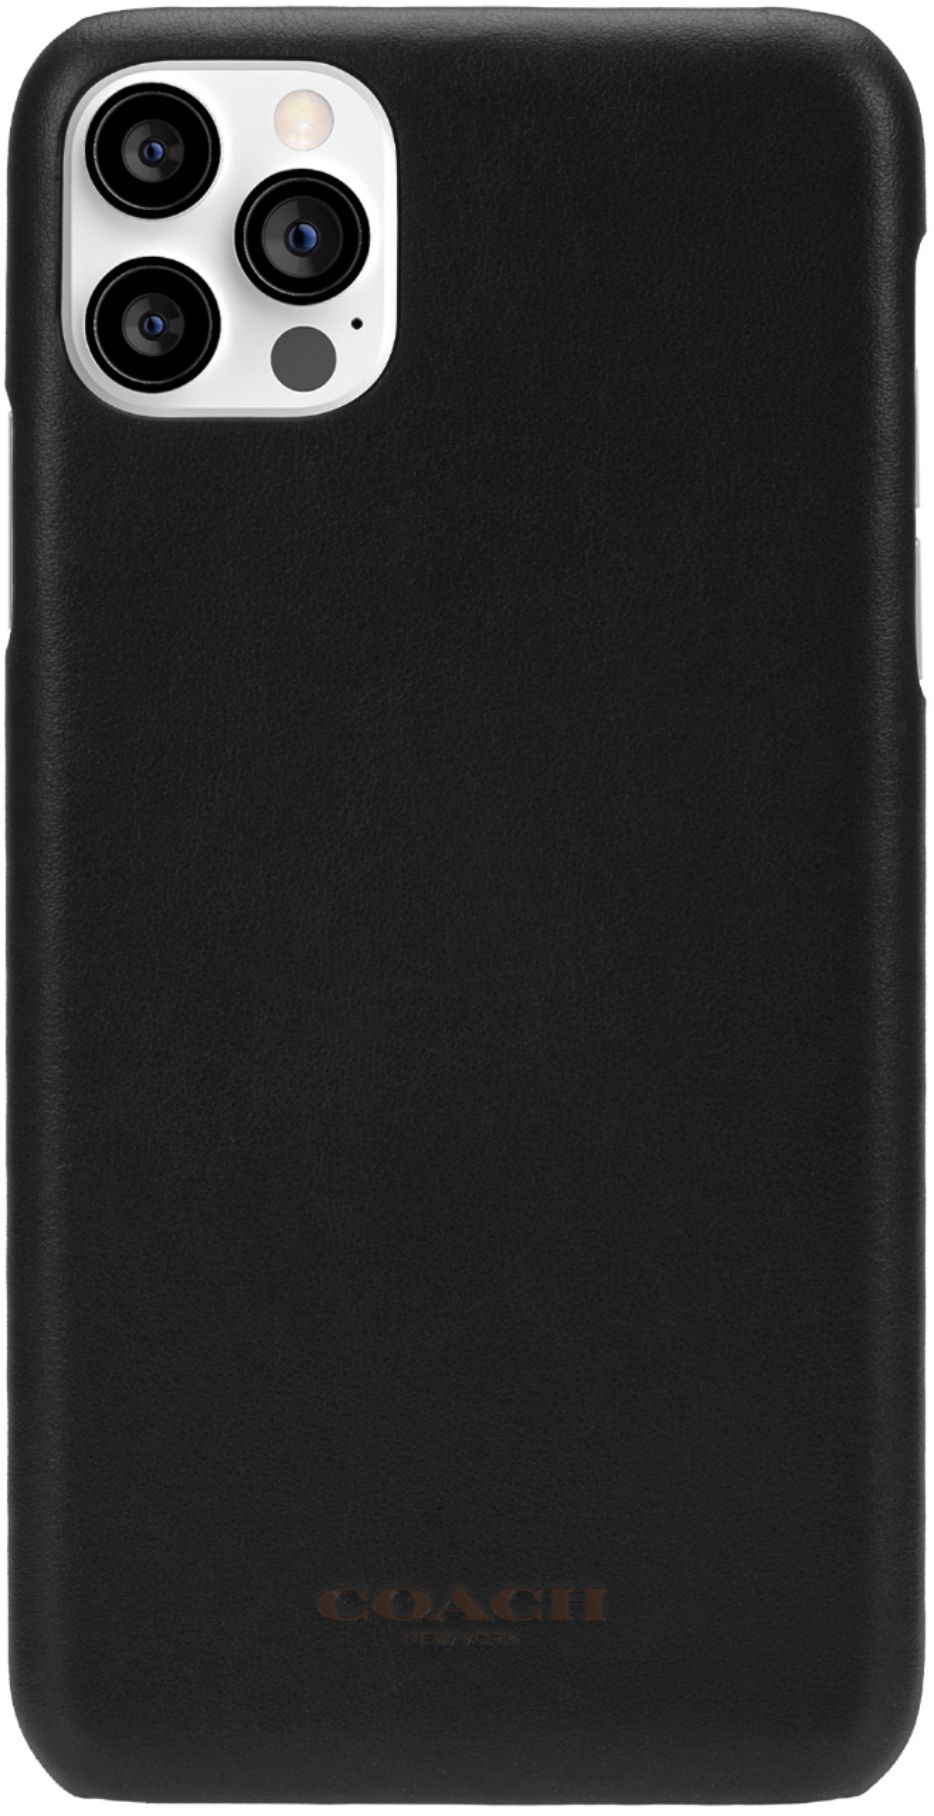 Best Buy: Coach Leather Slim Protective Case for iPhone 12 Pro Max CIPH ...